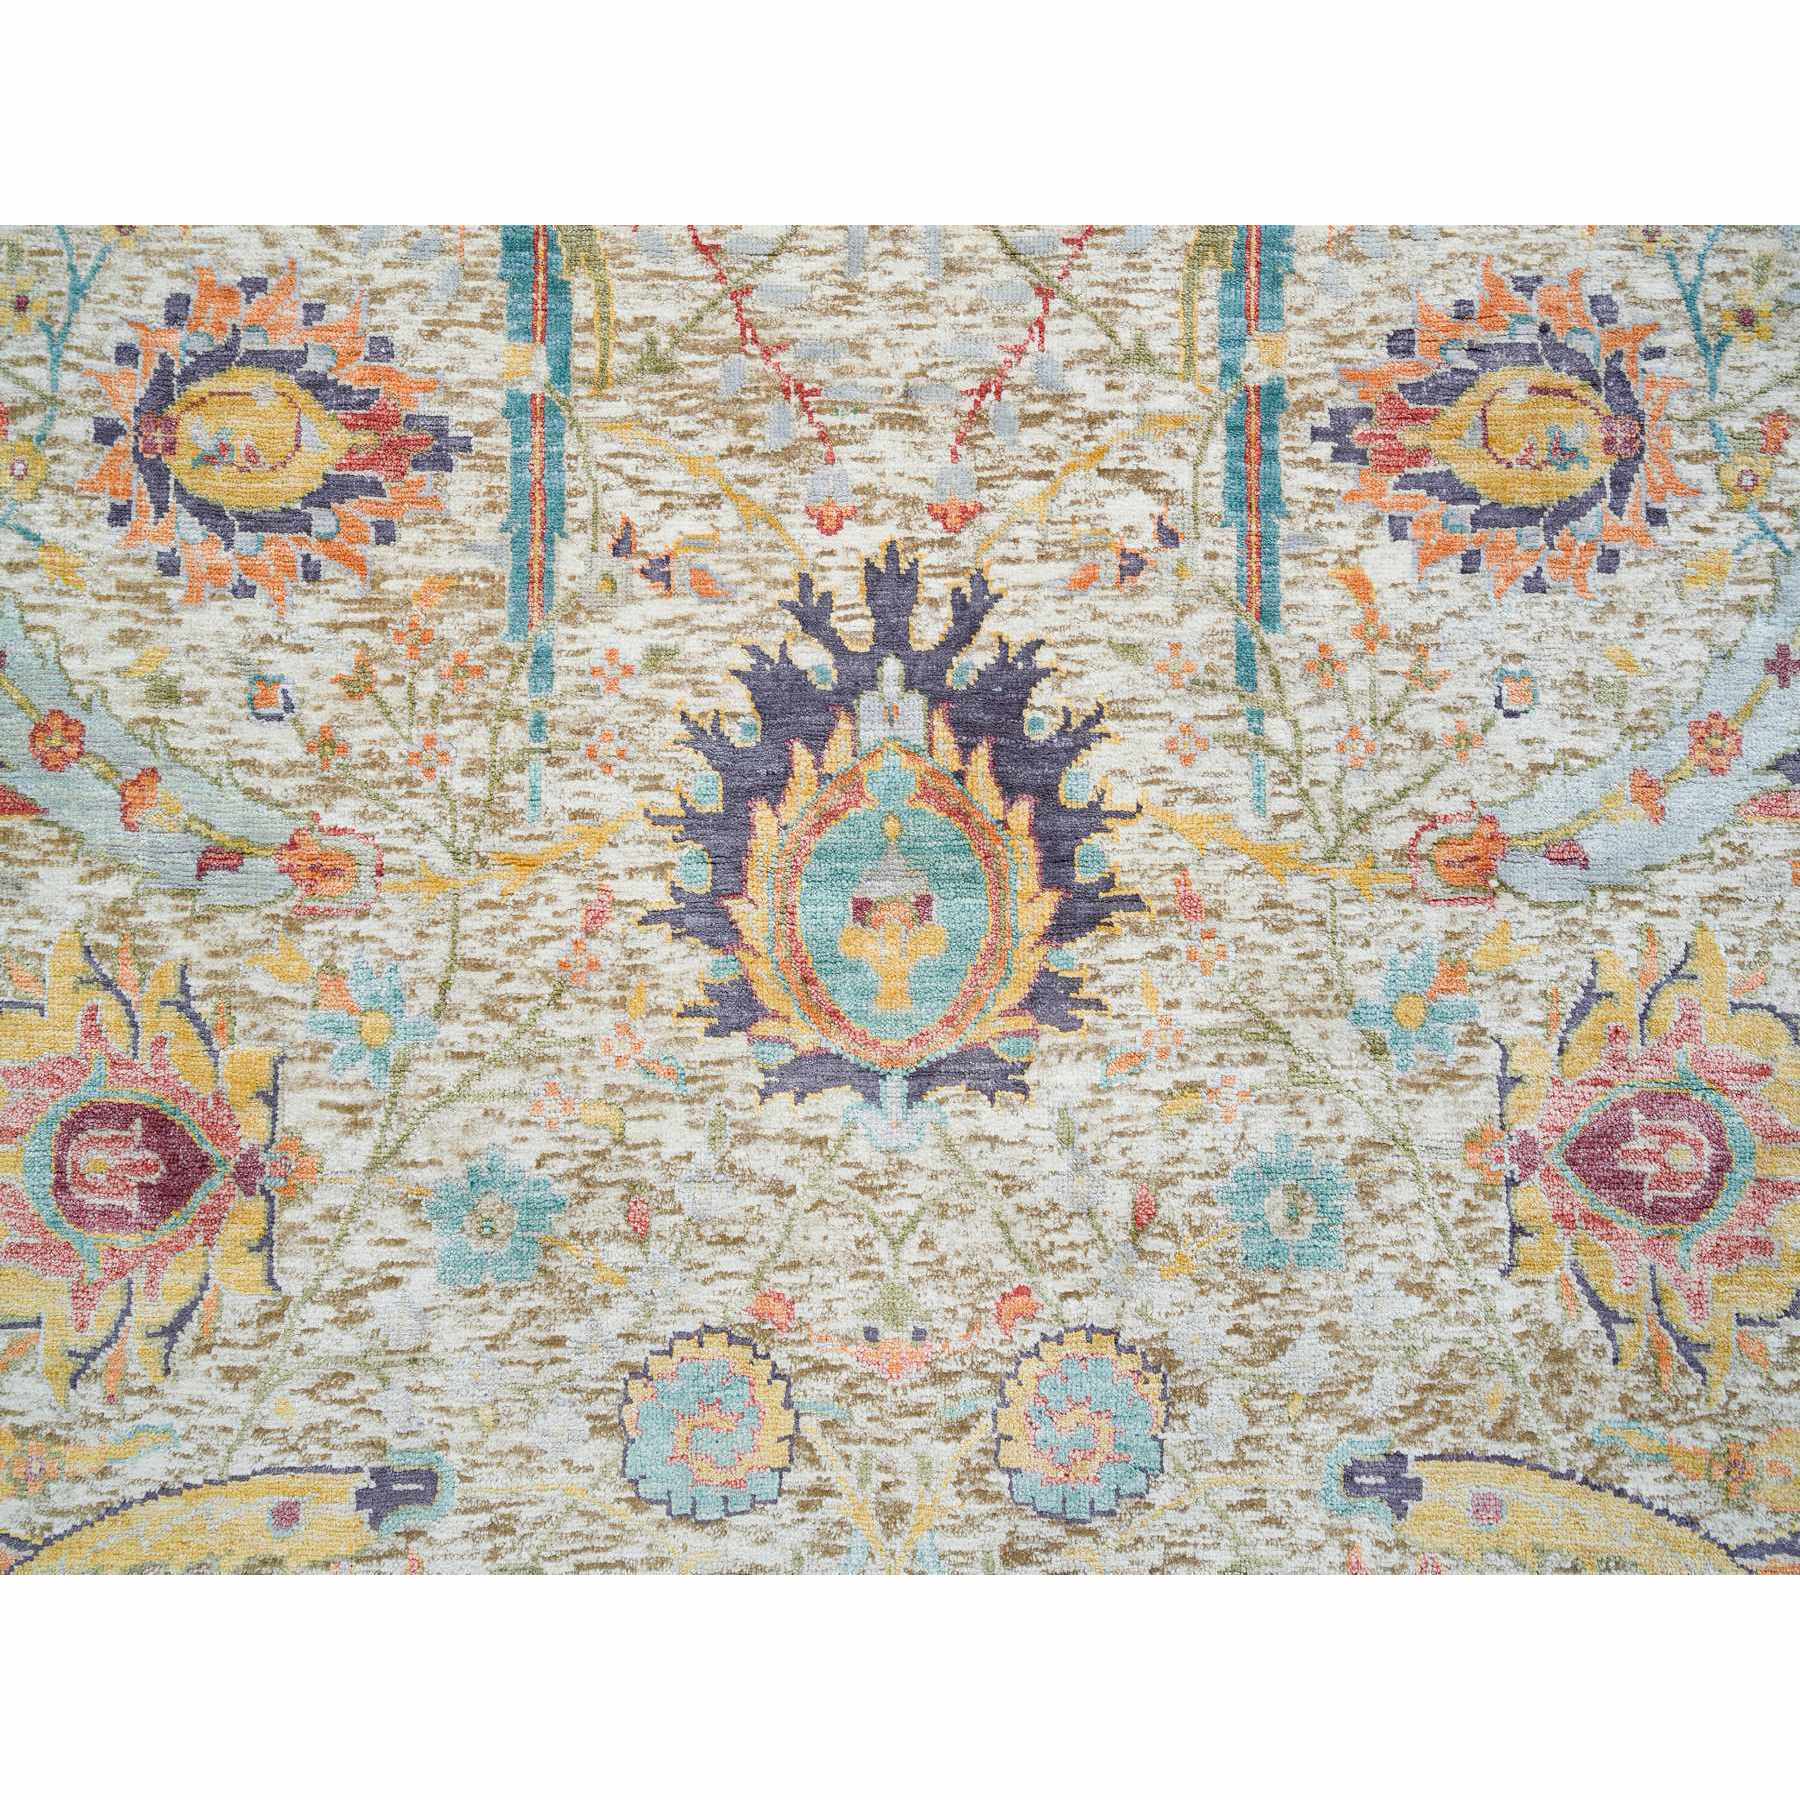  Silk Hand-Knotted Area Rug 5'2